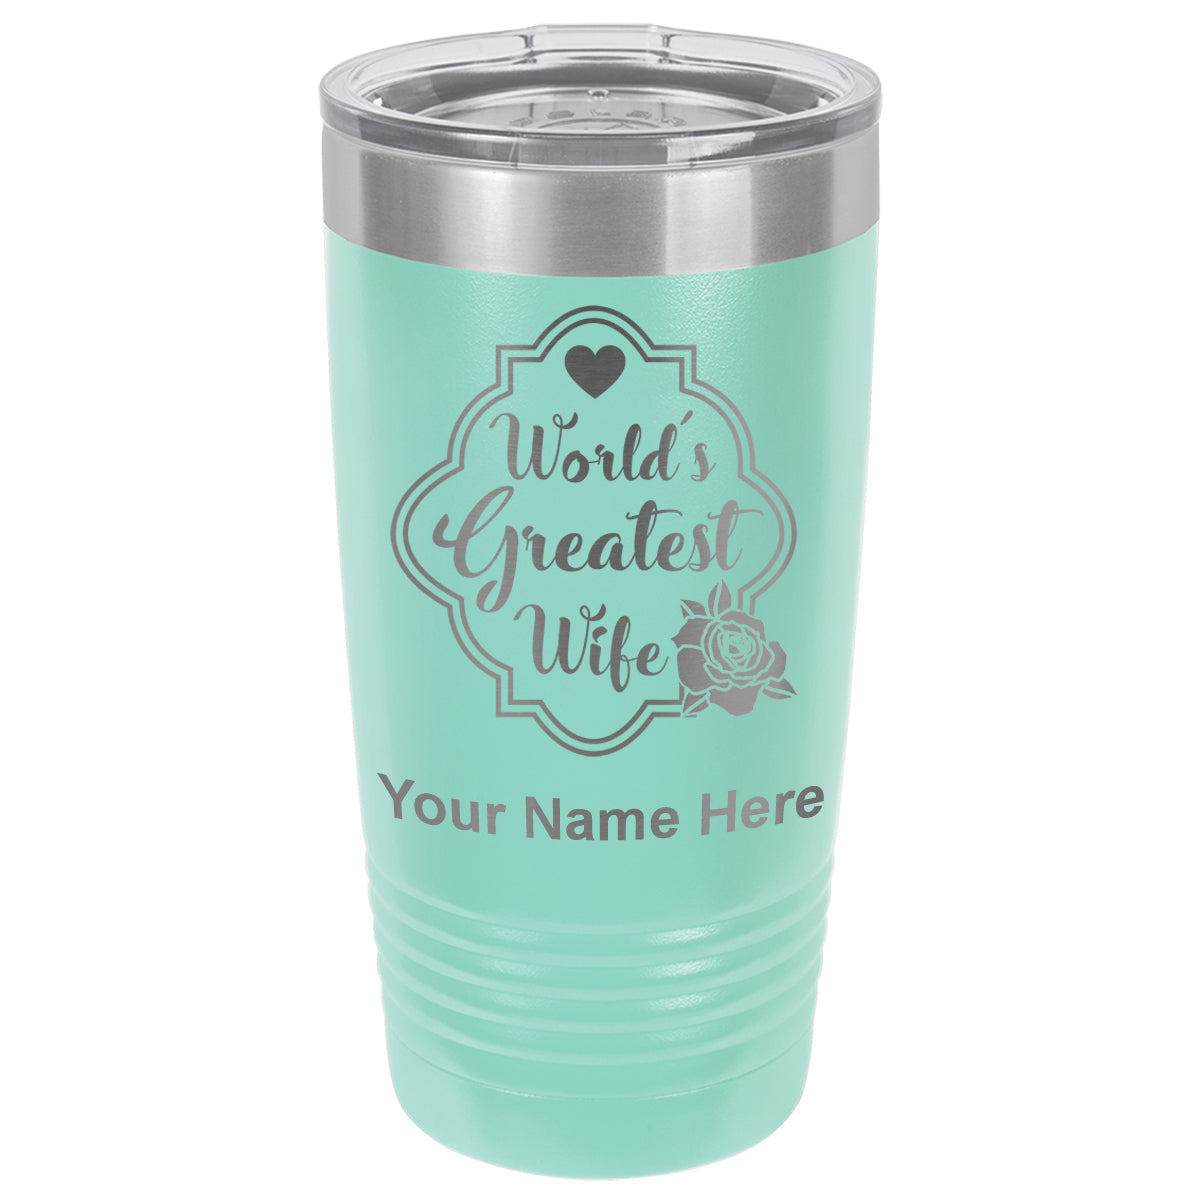 20oz Vacuum Insulated Tumbler Mug, World's Greatest Wife, Personalized Engraving Included